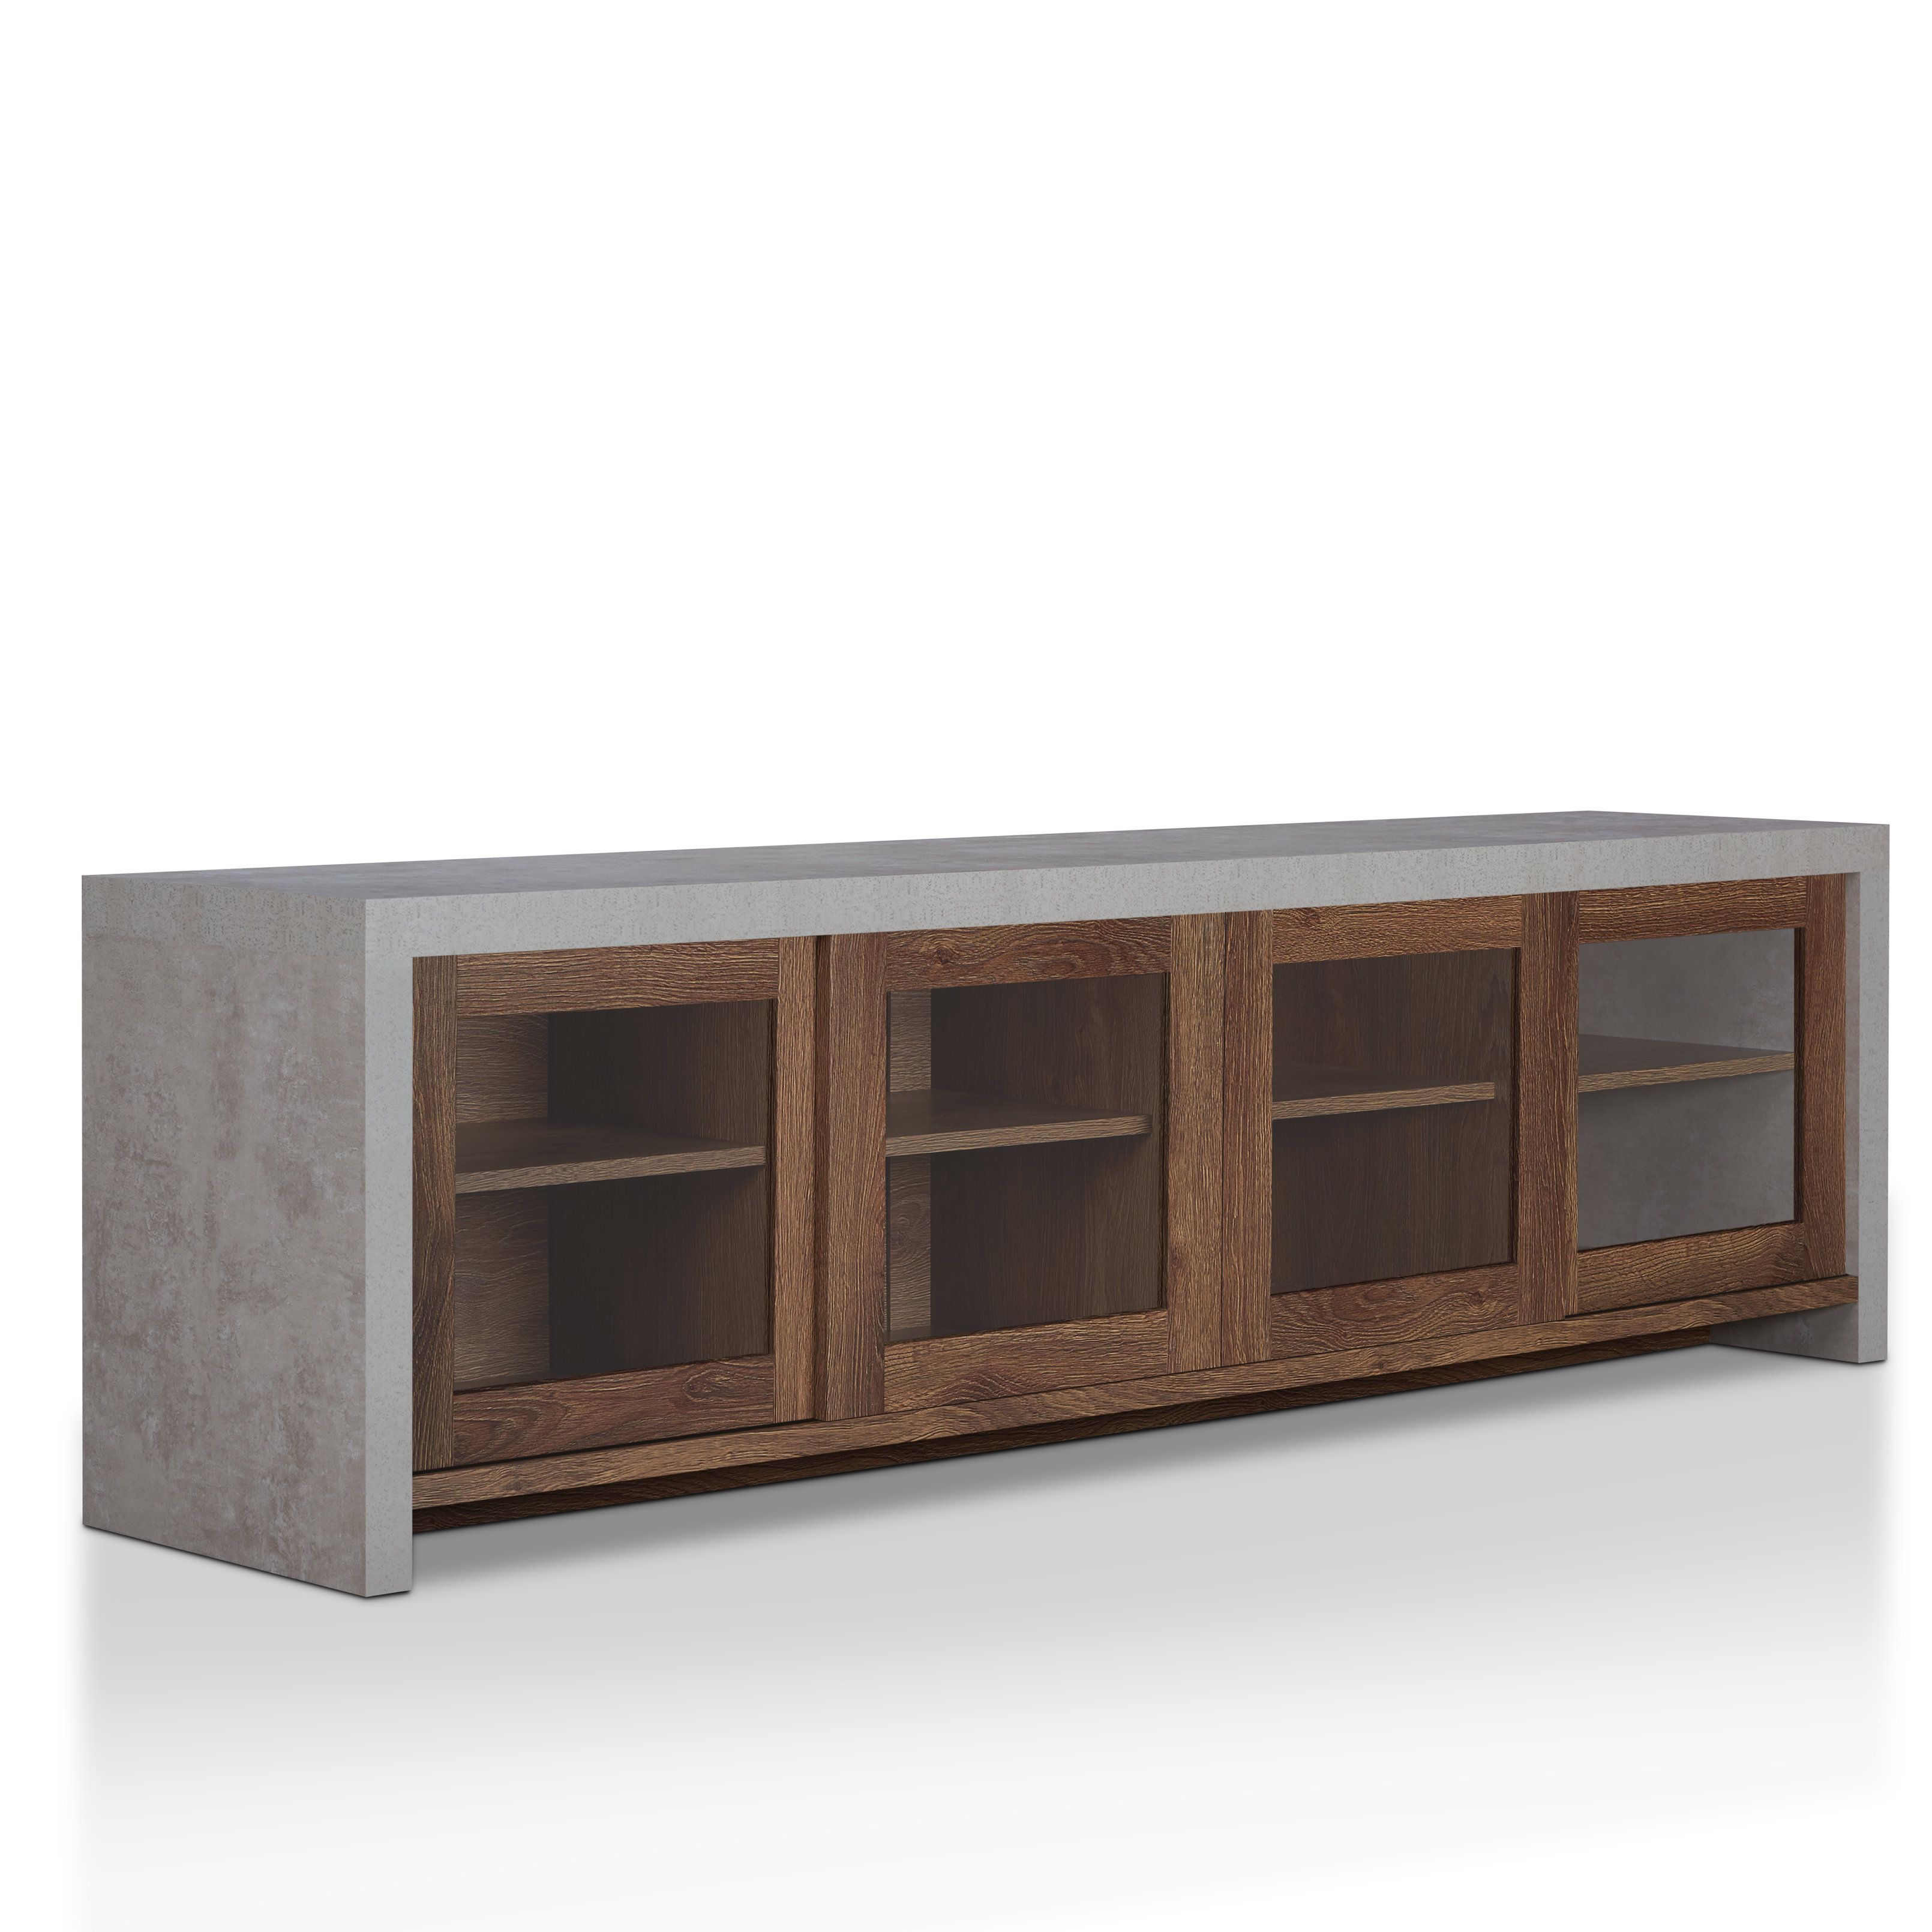 Behan Transitional Tv Stand For Tvs Up To 70" & Reviews | Allmodern Within Laurent 70 Inch Tv Stands (View 18 of 30)